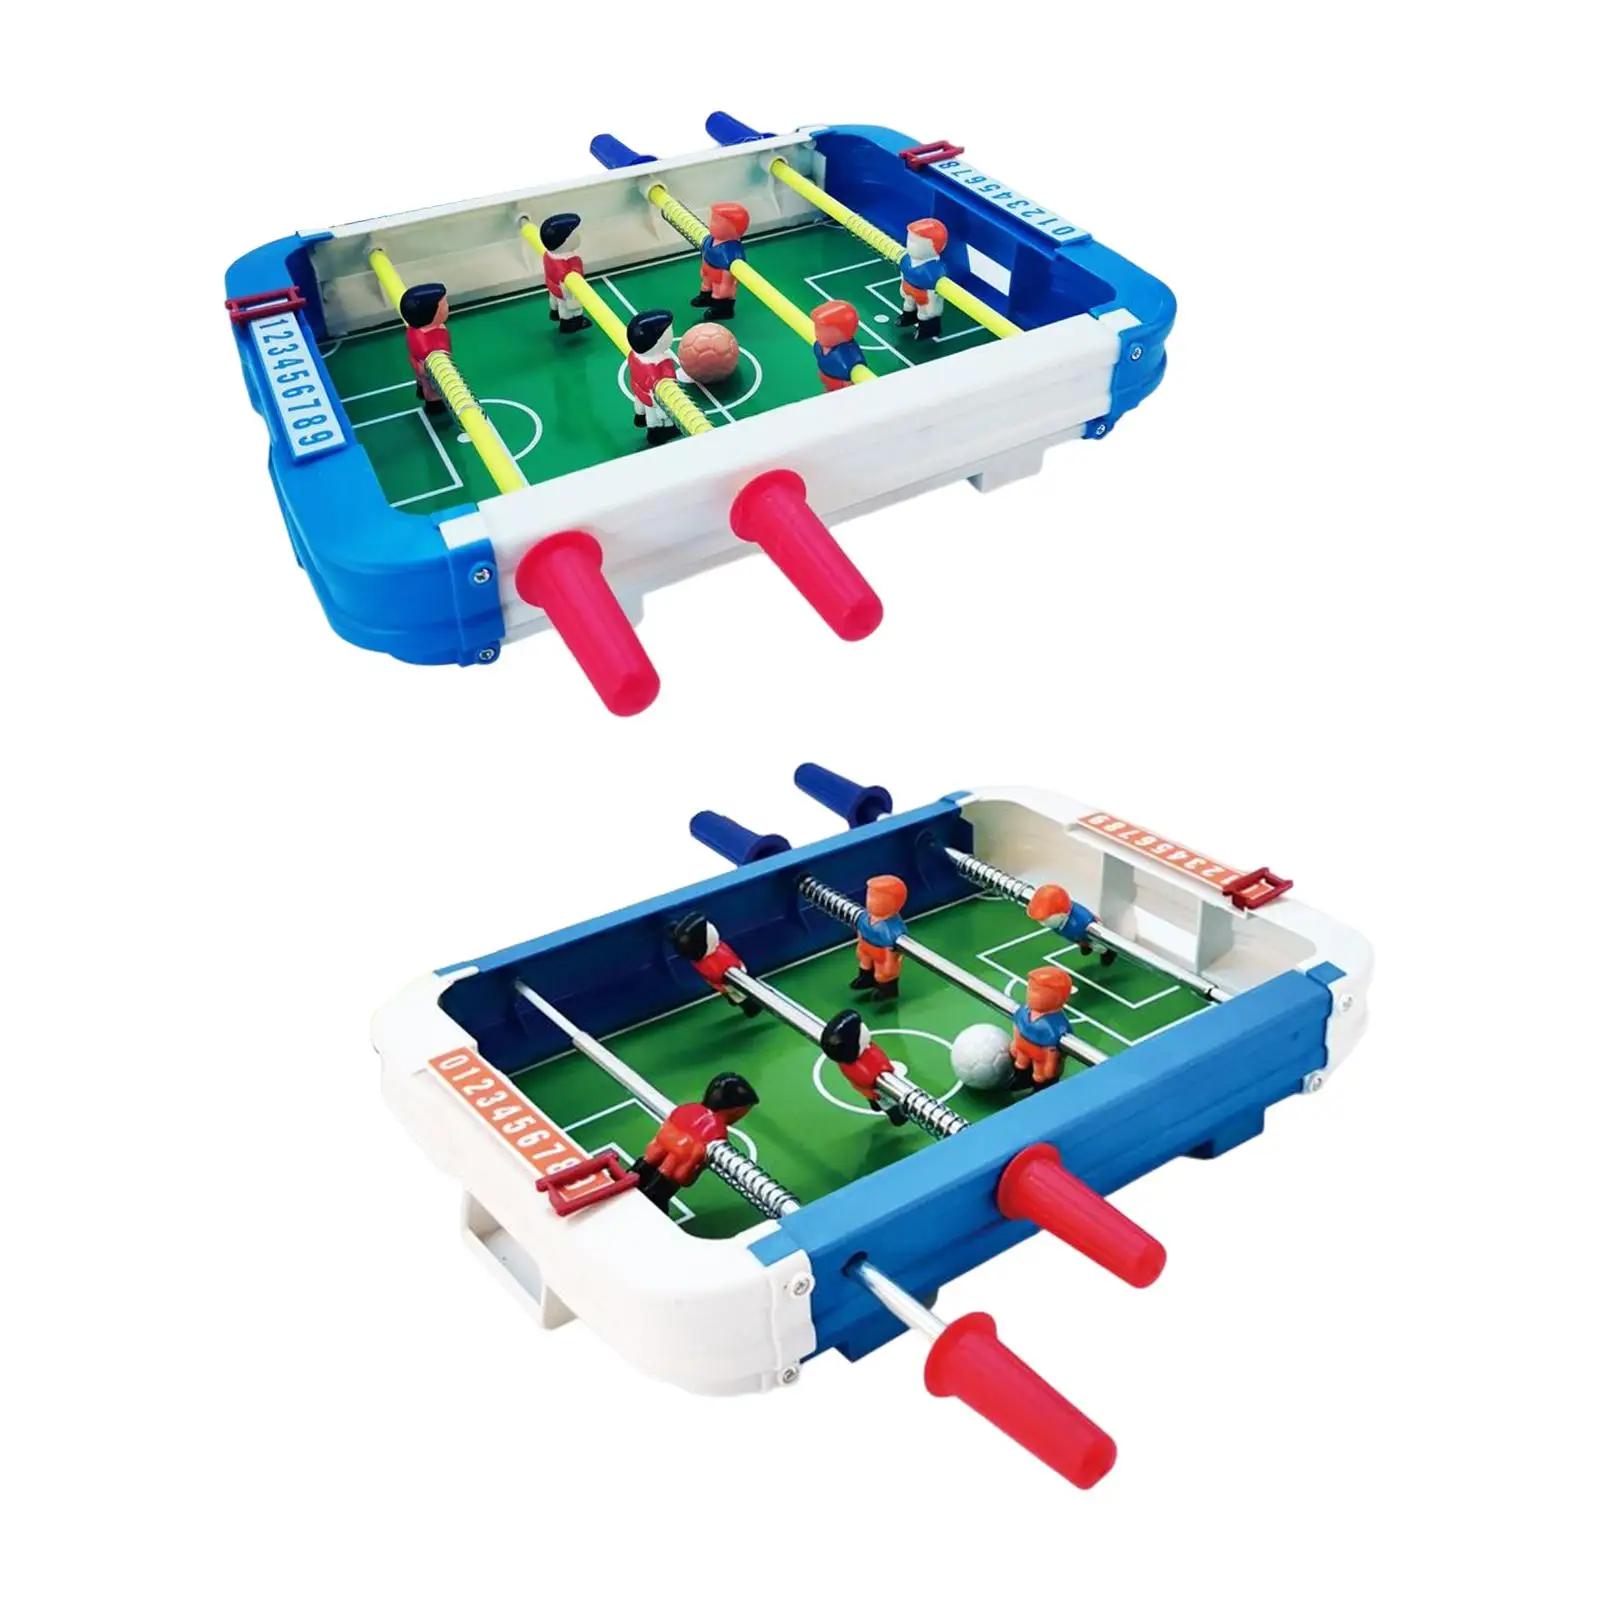 Foosball Table, Desktop Football Board Games Intellectual Developmental Table Top Soccer Easy to Store Interactive for Children